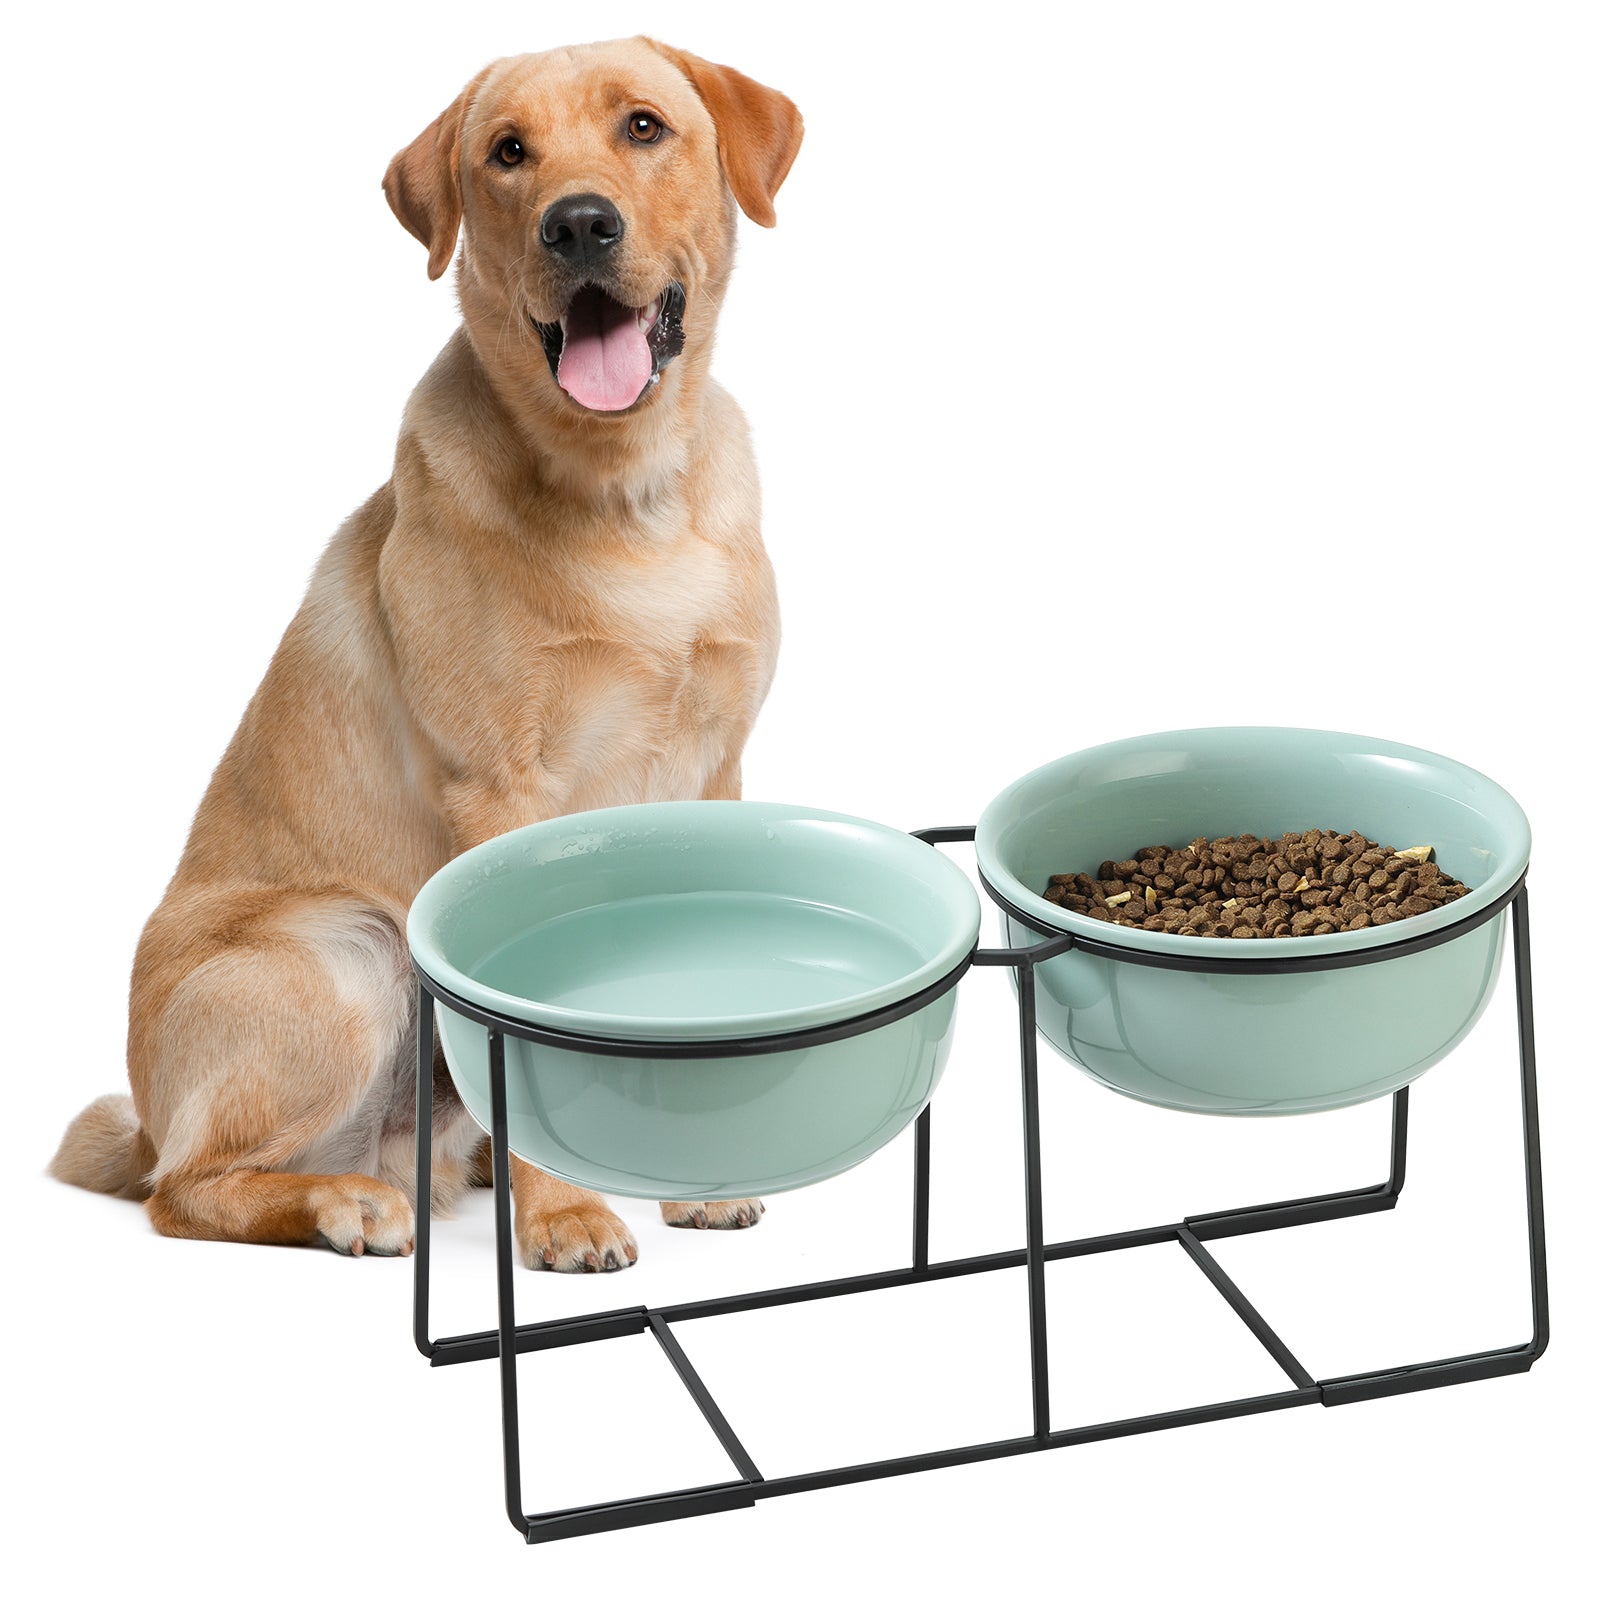 Elevated Large Dog Bowl Set - Raised Dog Food and Water Bowl with Non Slip Stand - Heavy Weighted Double Ceramic Dog Feeding Bowls - Extra Wide Deep Pet Dishes for Medium to Big Dogs